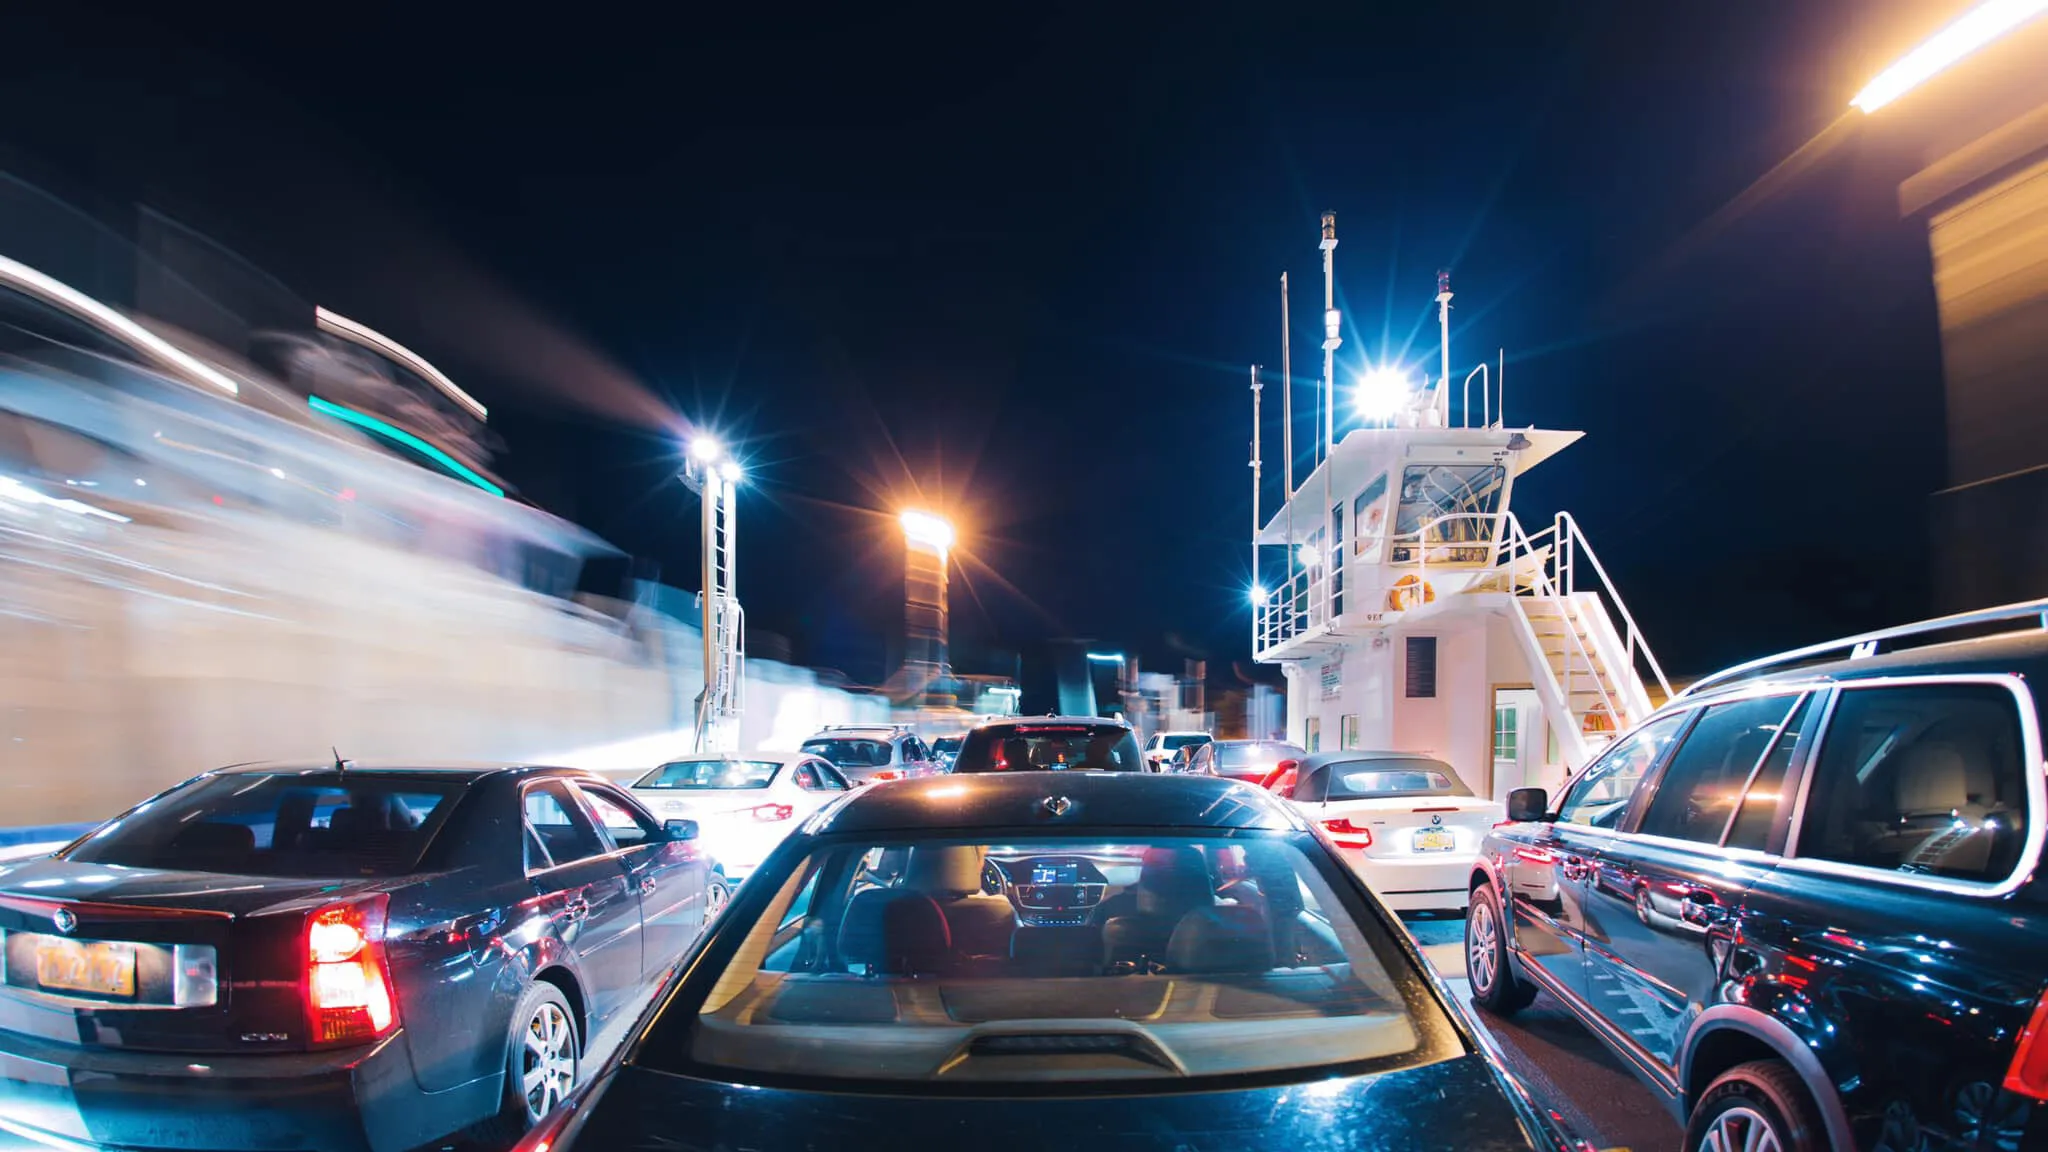 Cars aboard a ferry at night